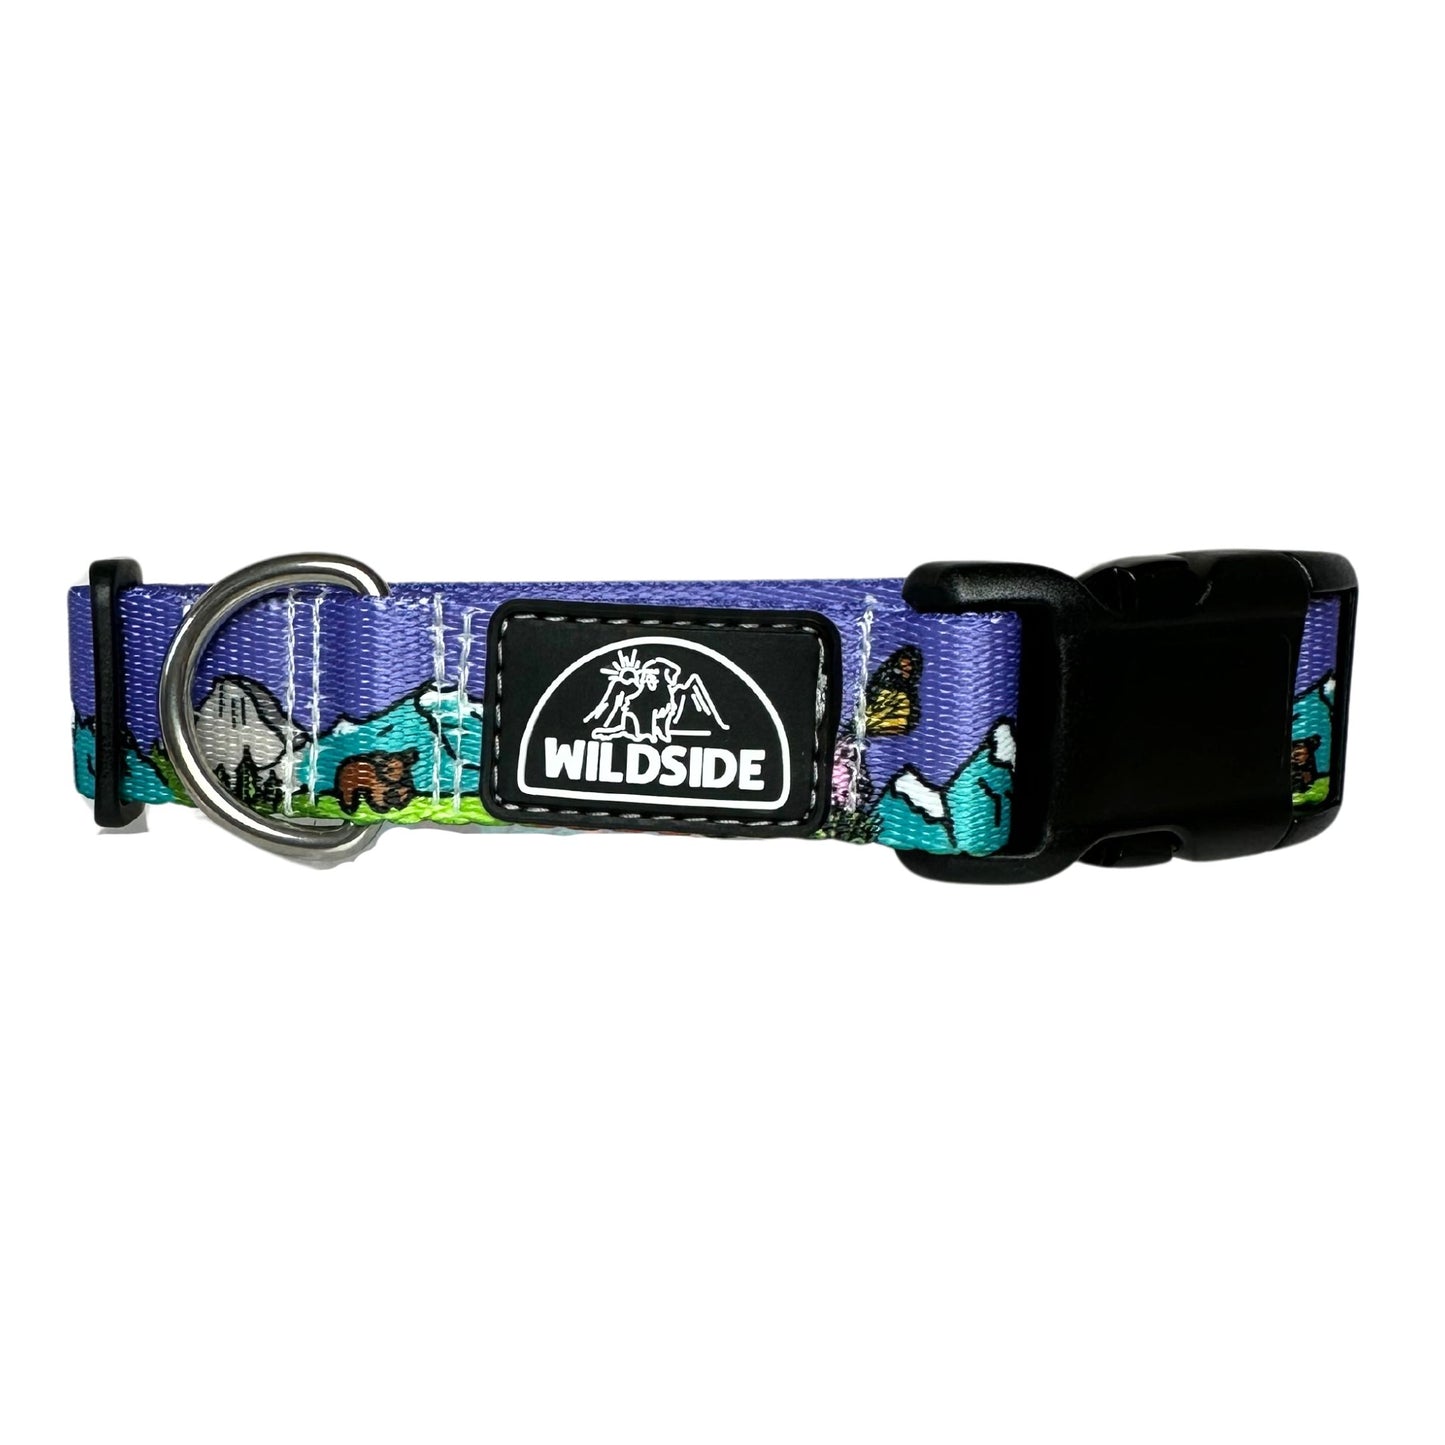 National Parks Collars